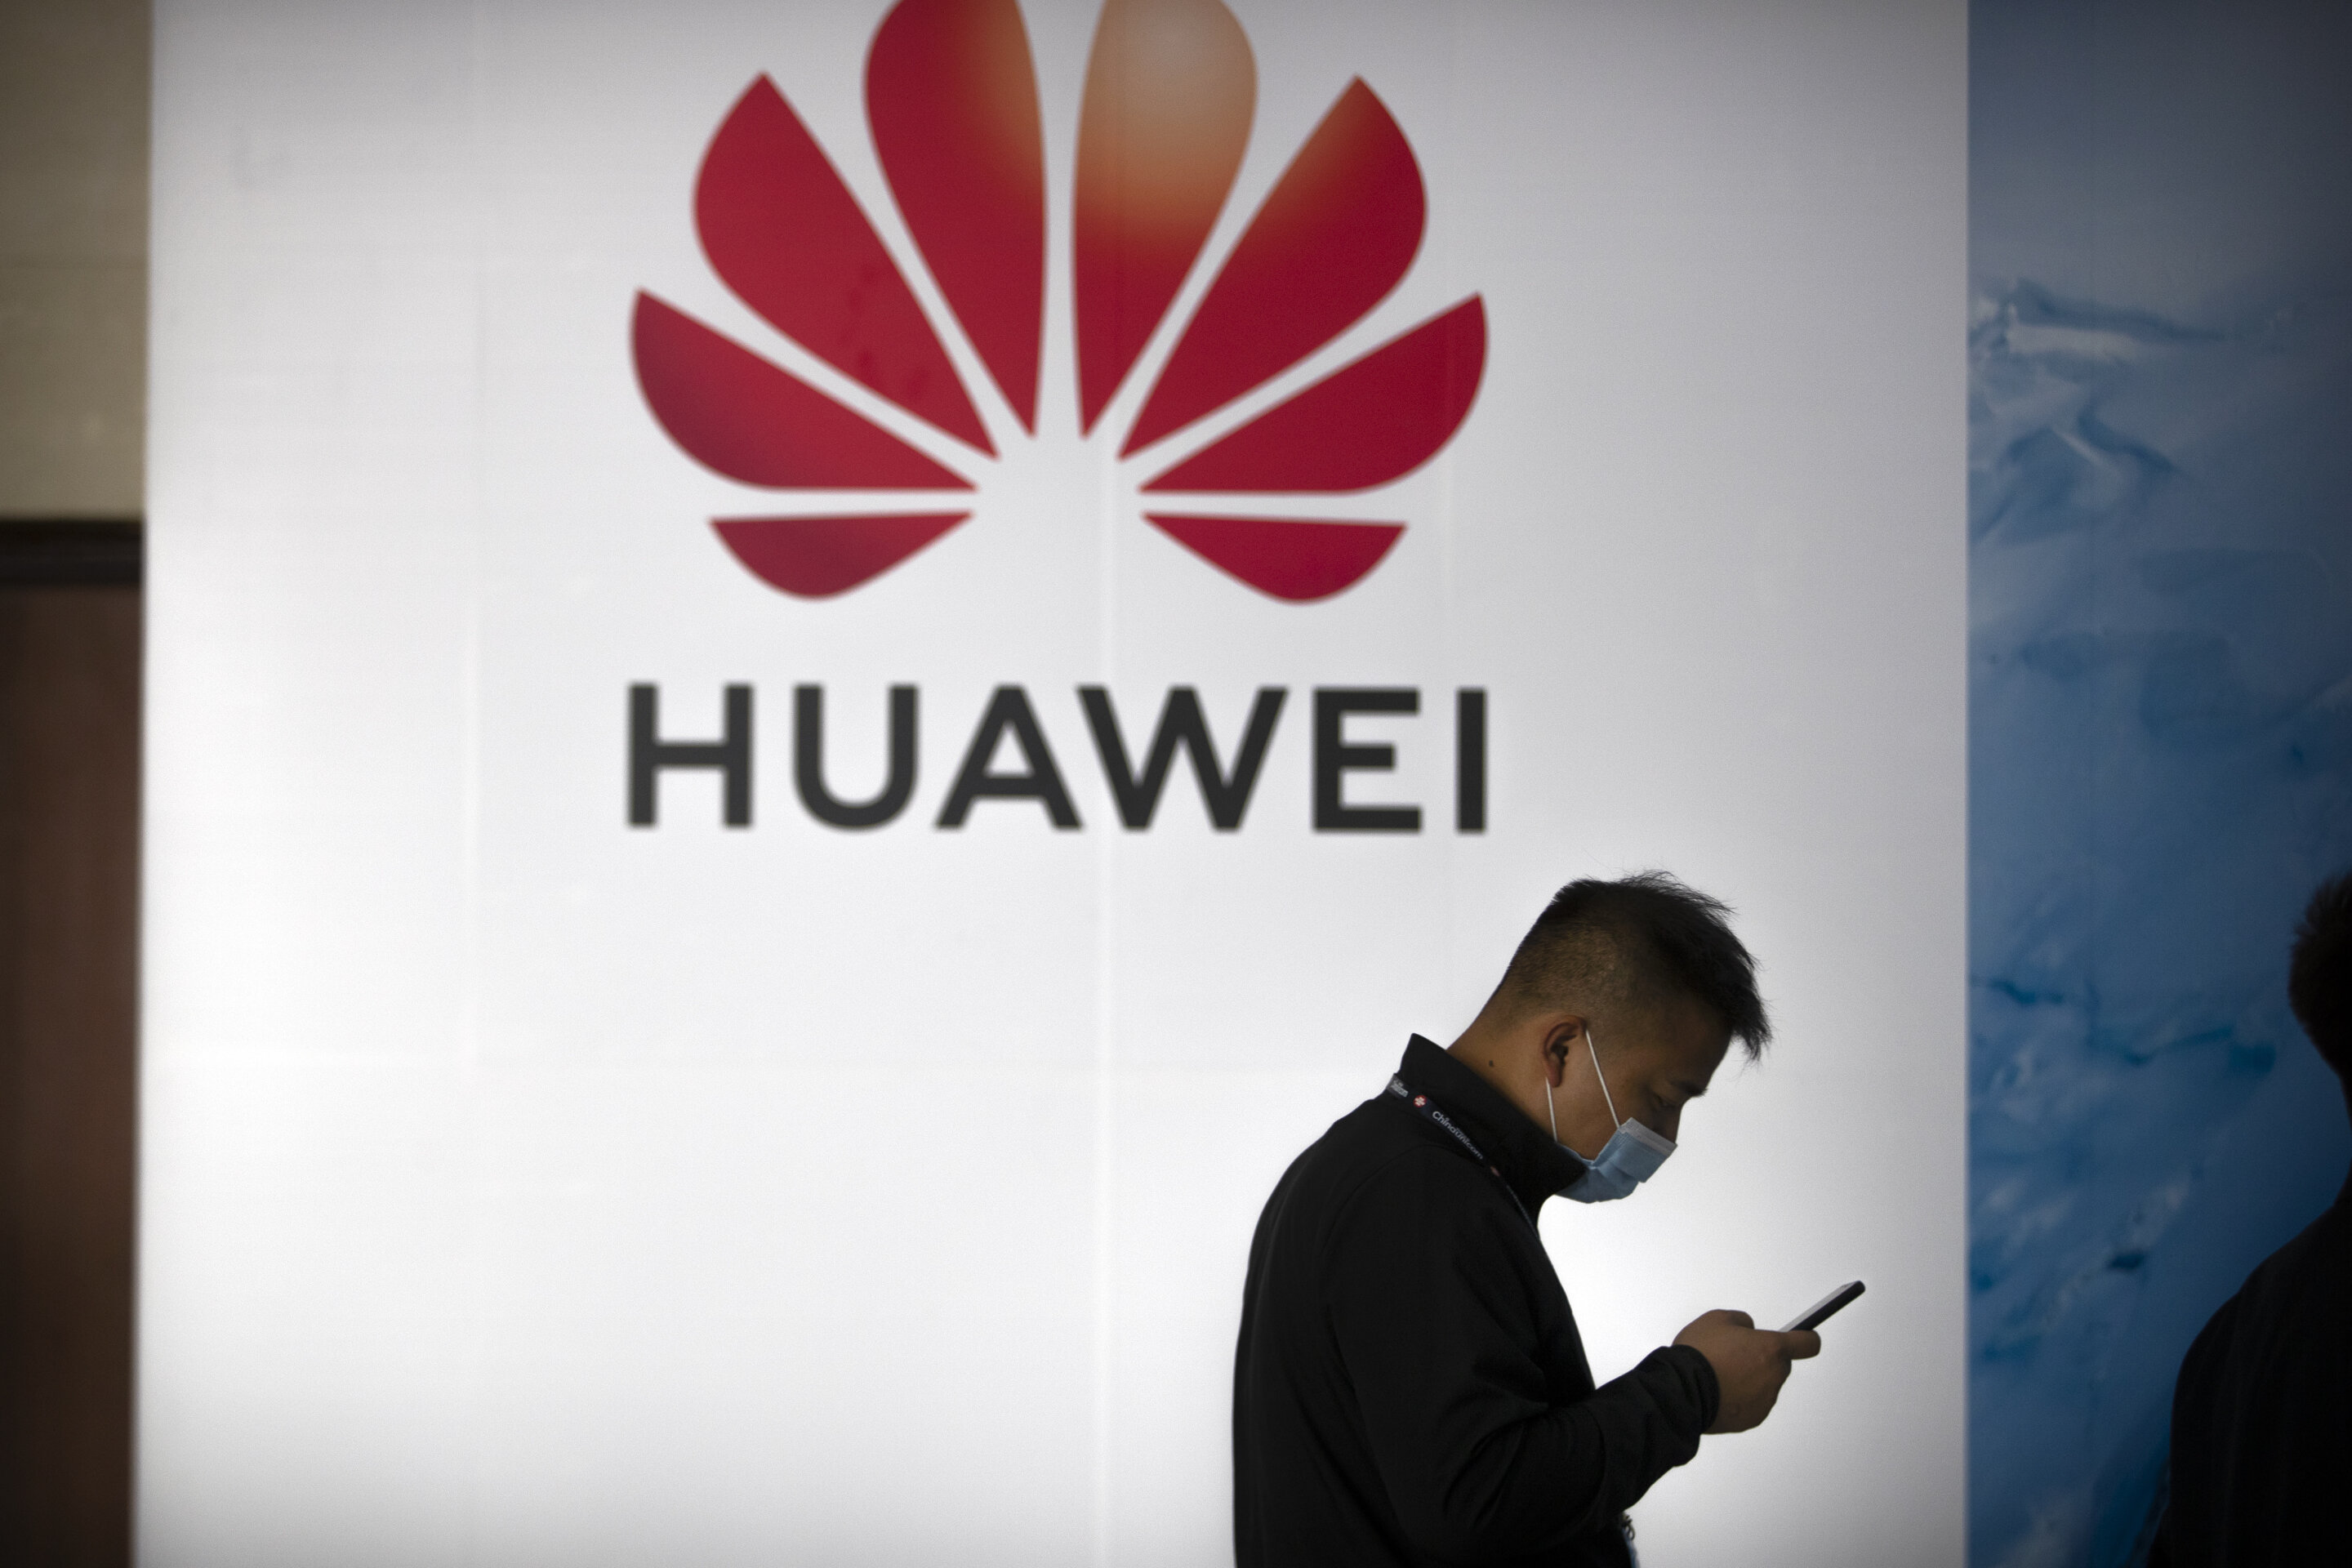 #China’s Huawei says sales down but new ventures growing